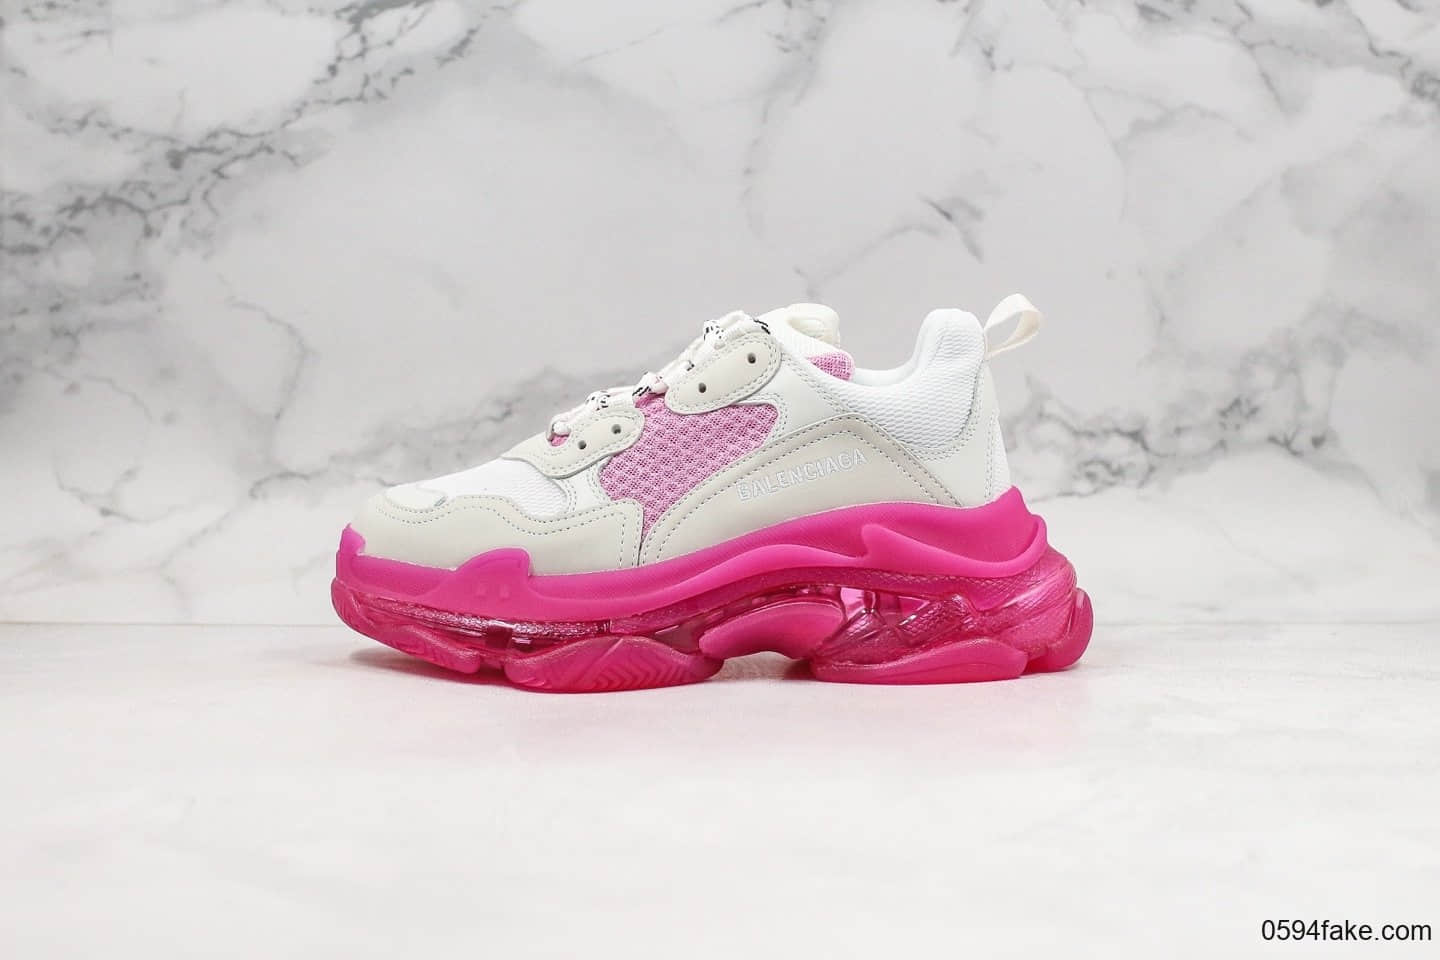 Balenciaga Triple-S New Pink Colorway Launches